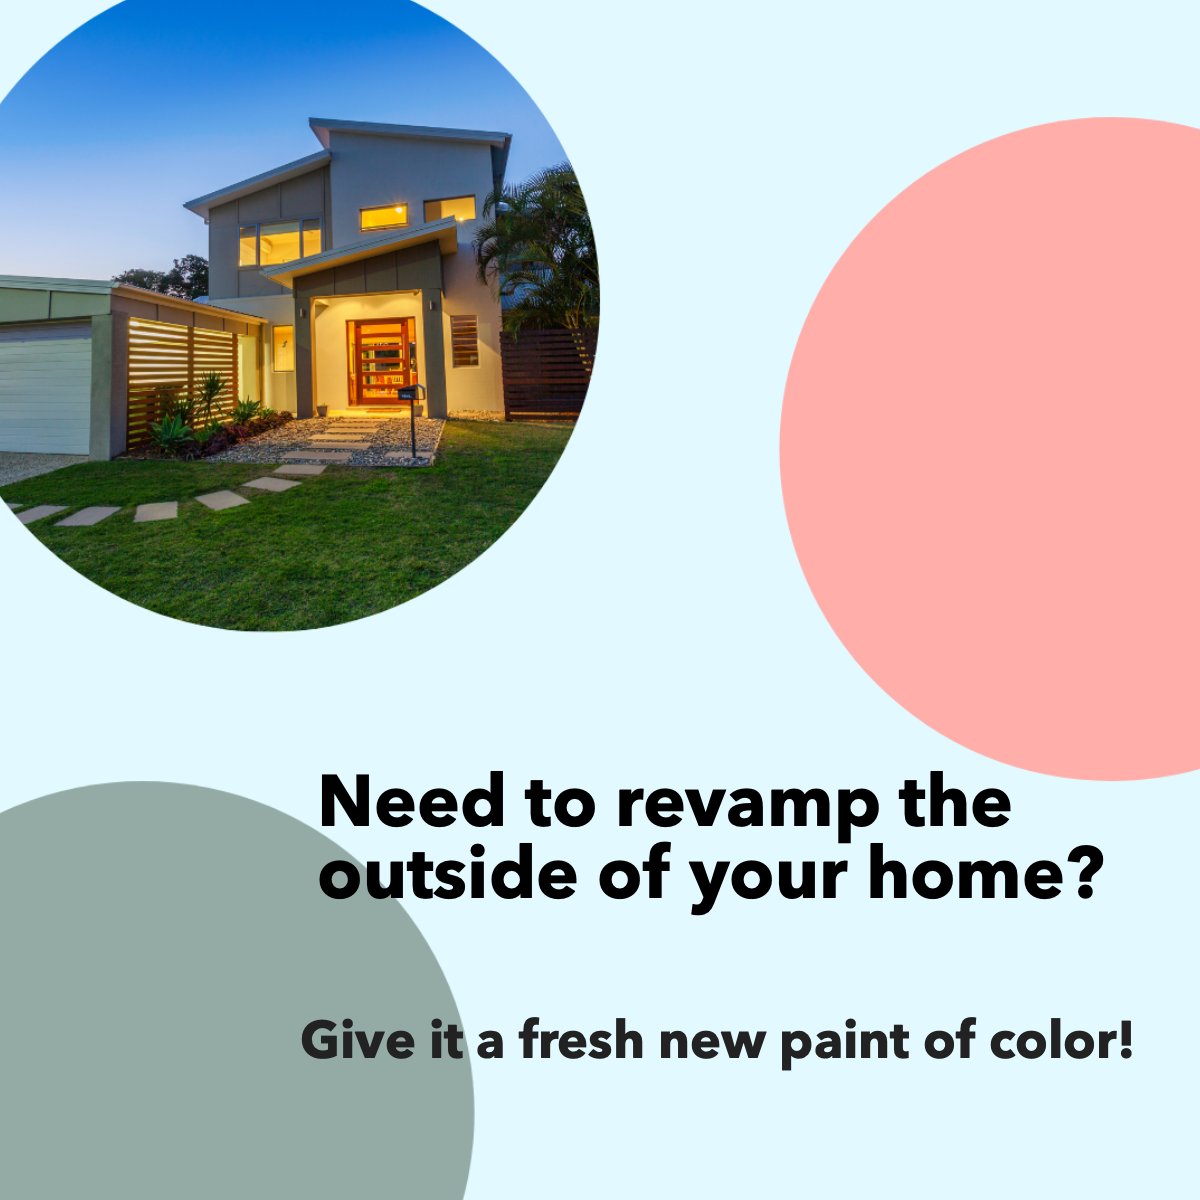 Need to revamp the outside of your home? 🎨

An exterior makeover can maximize curb appeal and give your home a whole new look. 😎

#paintingideas #paint #revamp
 #premierrealestatenetwork #pren #realestate #realtor #prescottquadcity #sedonaverdevalley